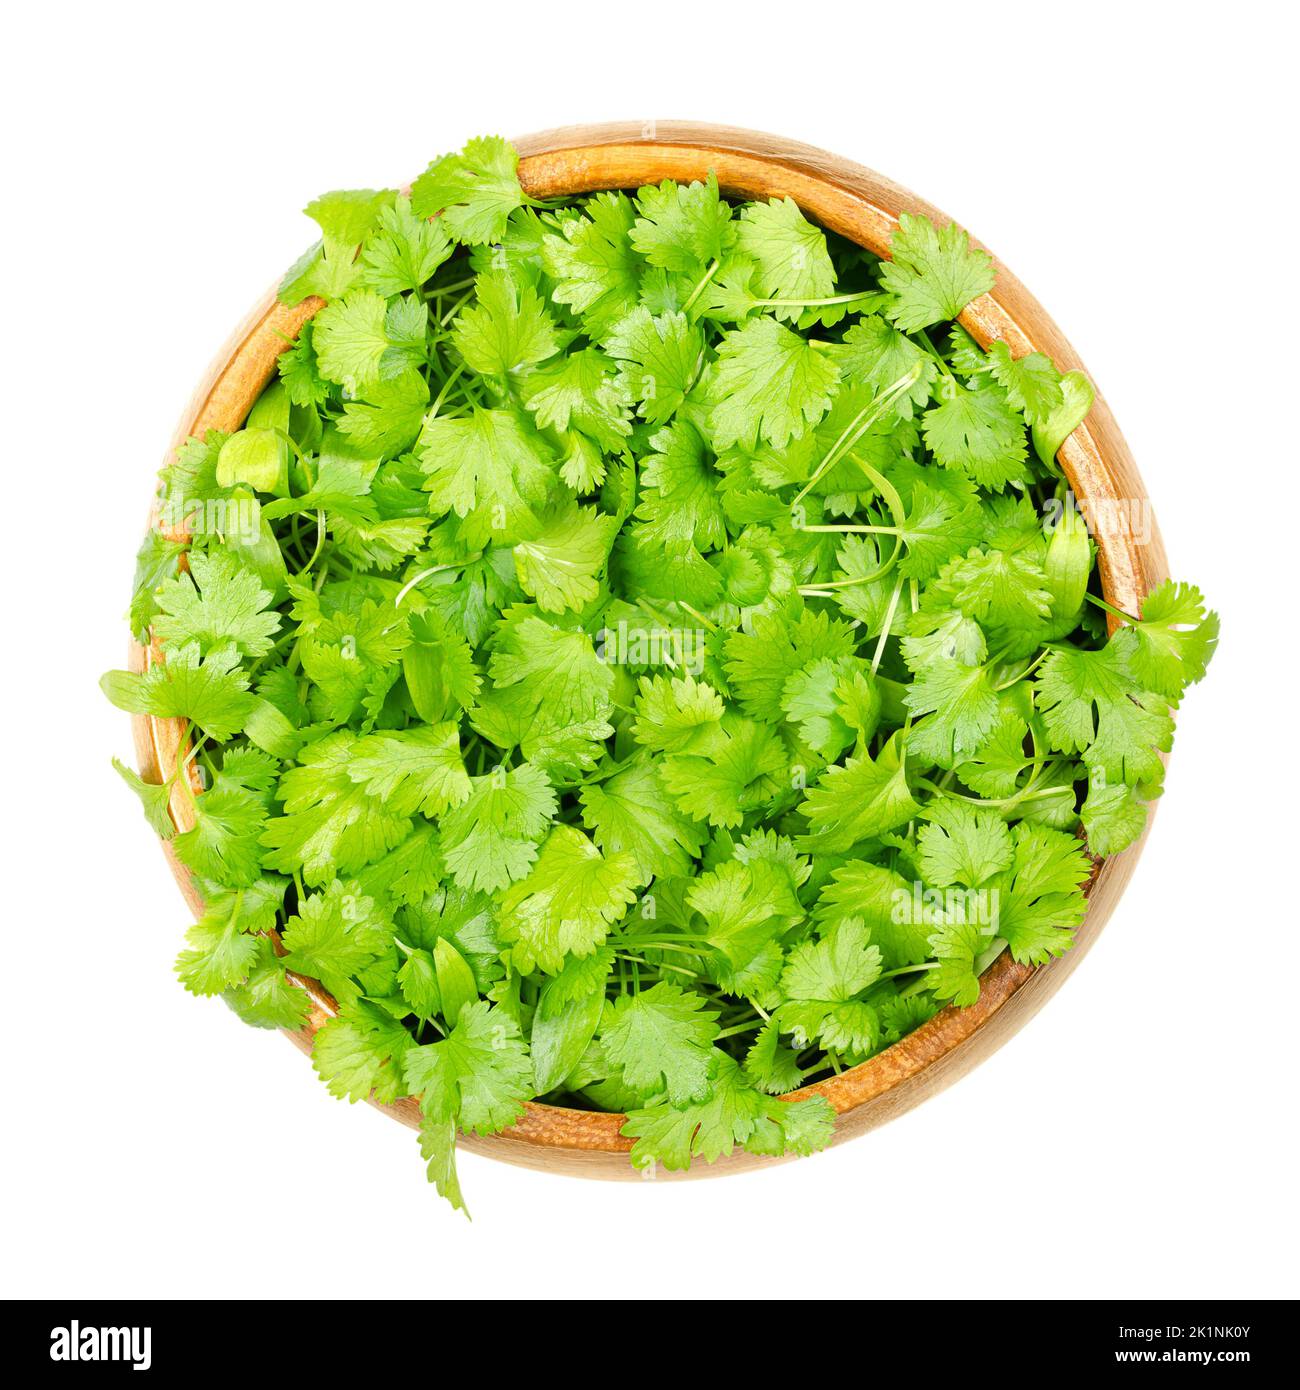 Cilantro microgreens, in a wooden bowl. Fresh and ready to eat green shoots of Coriandrum sativum, also called coriander, Chinese parsley or dhania. Stock Photo